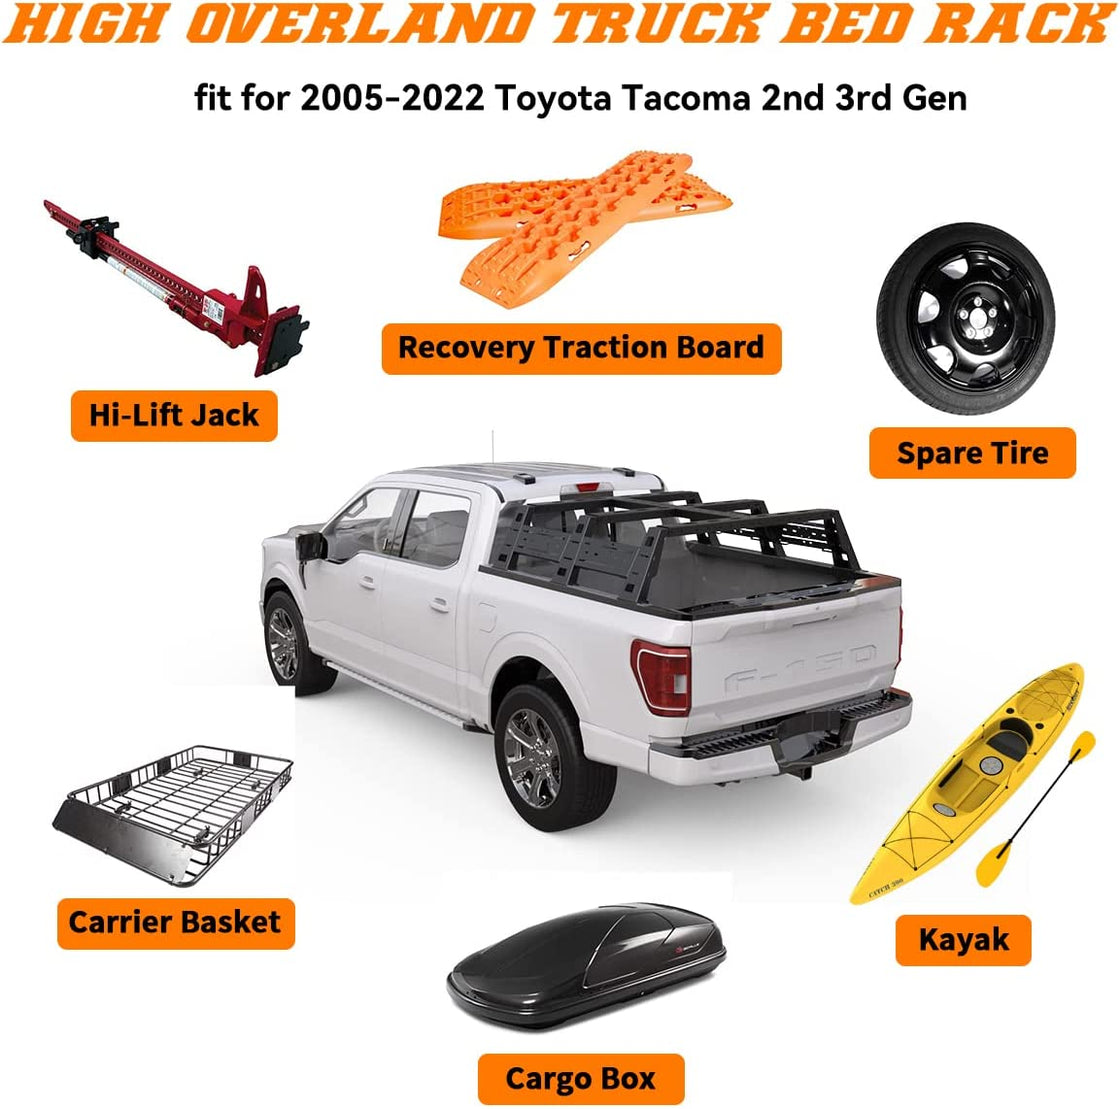 Overland Truck Bed Rack Tent Rack for Toyota Tacoma